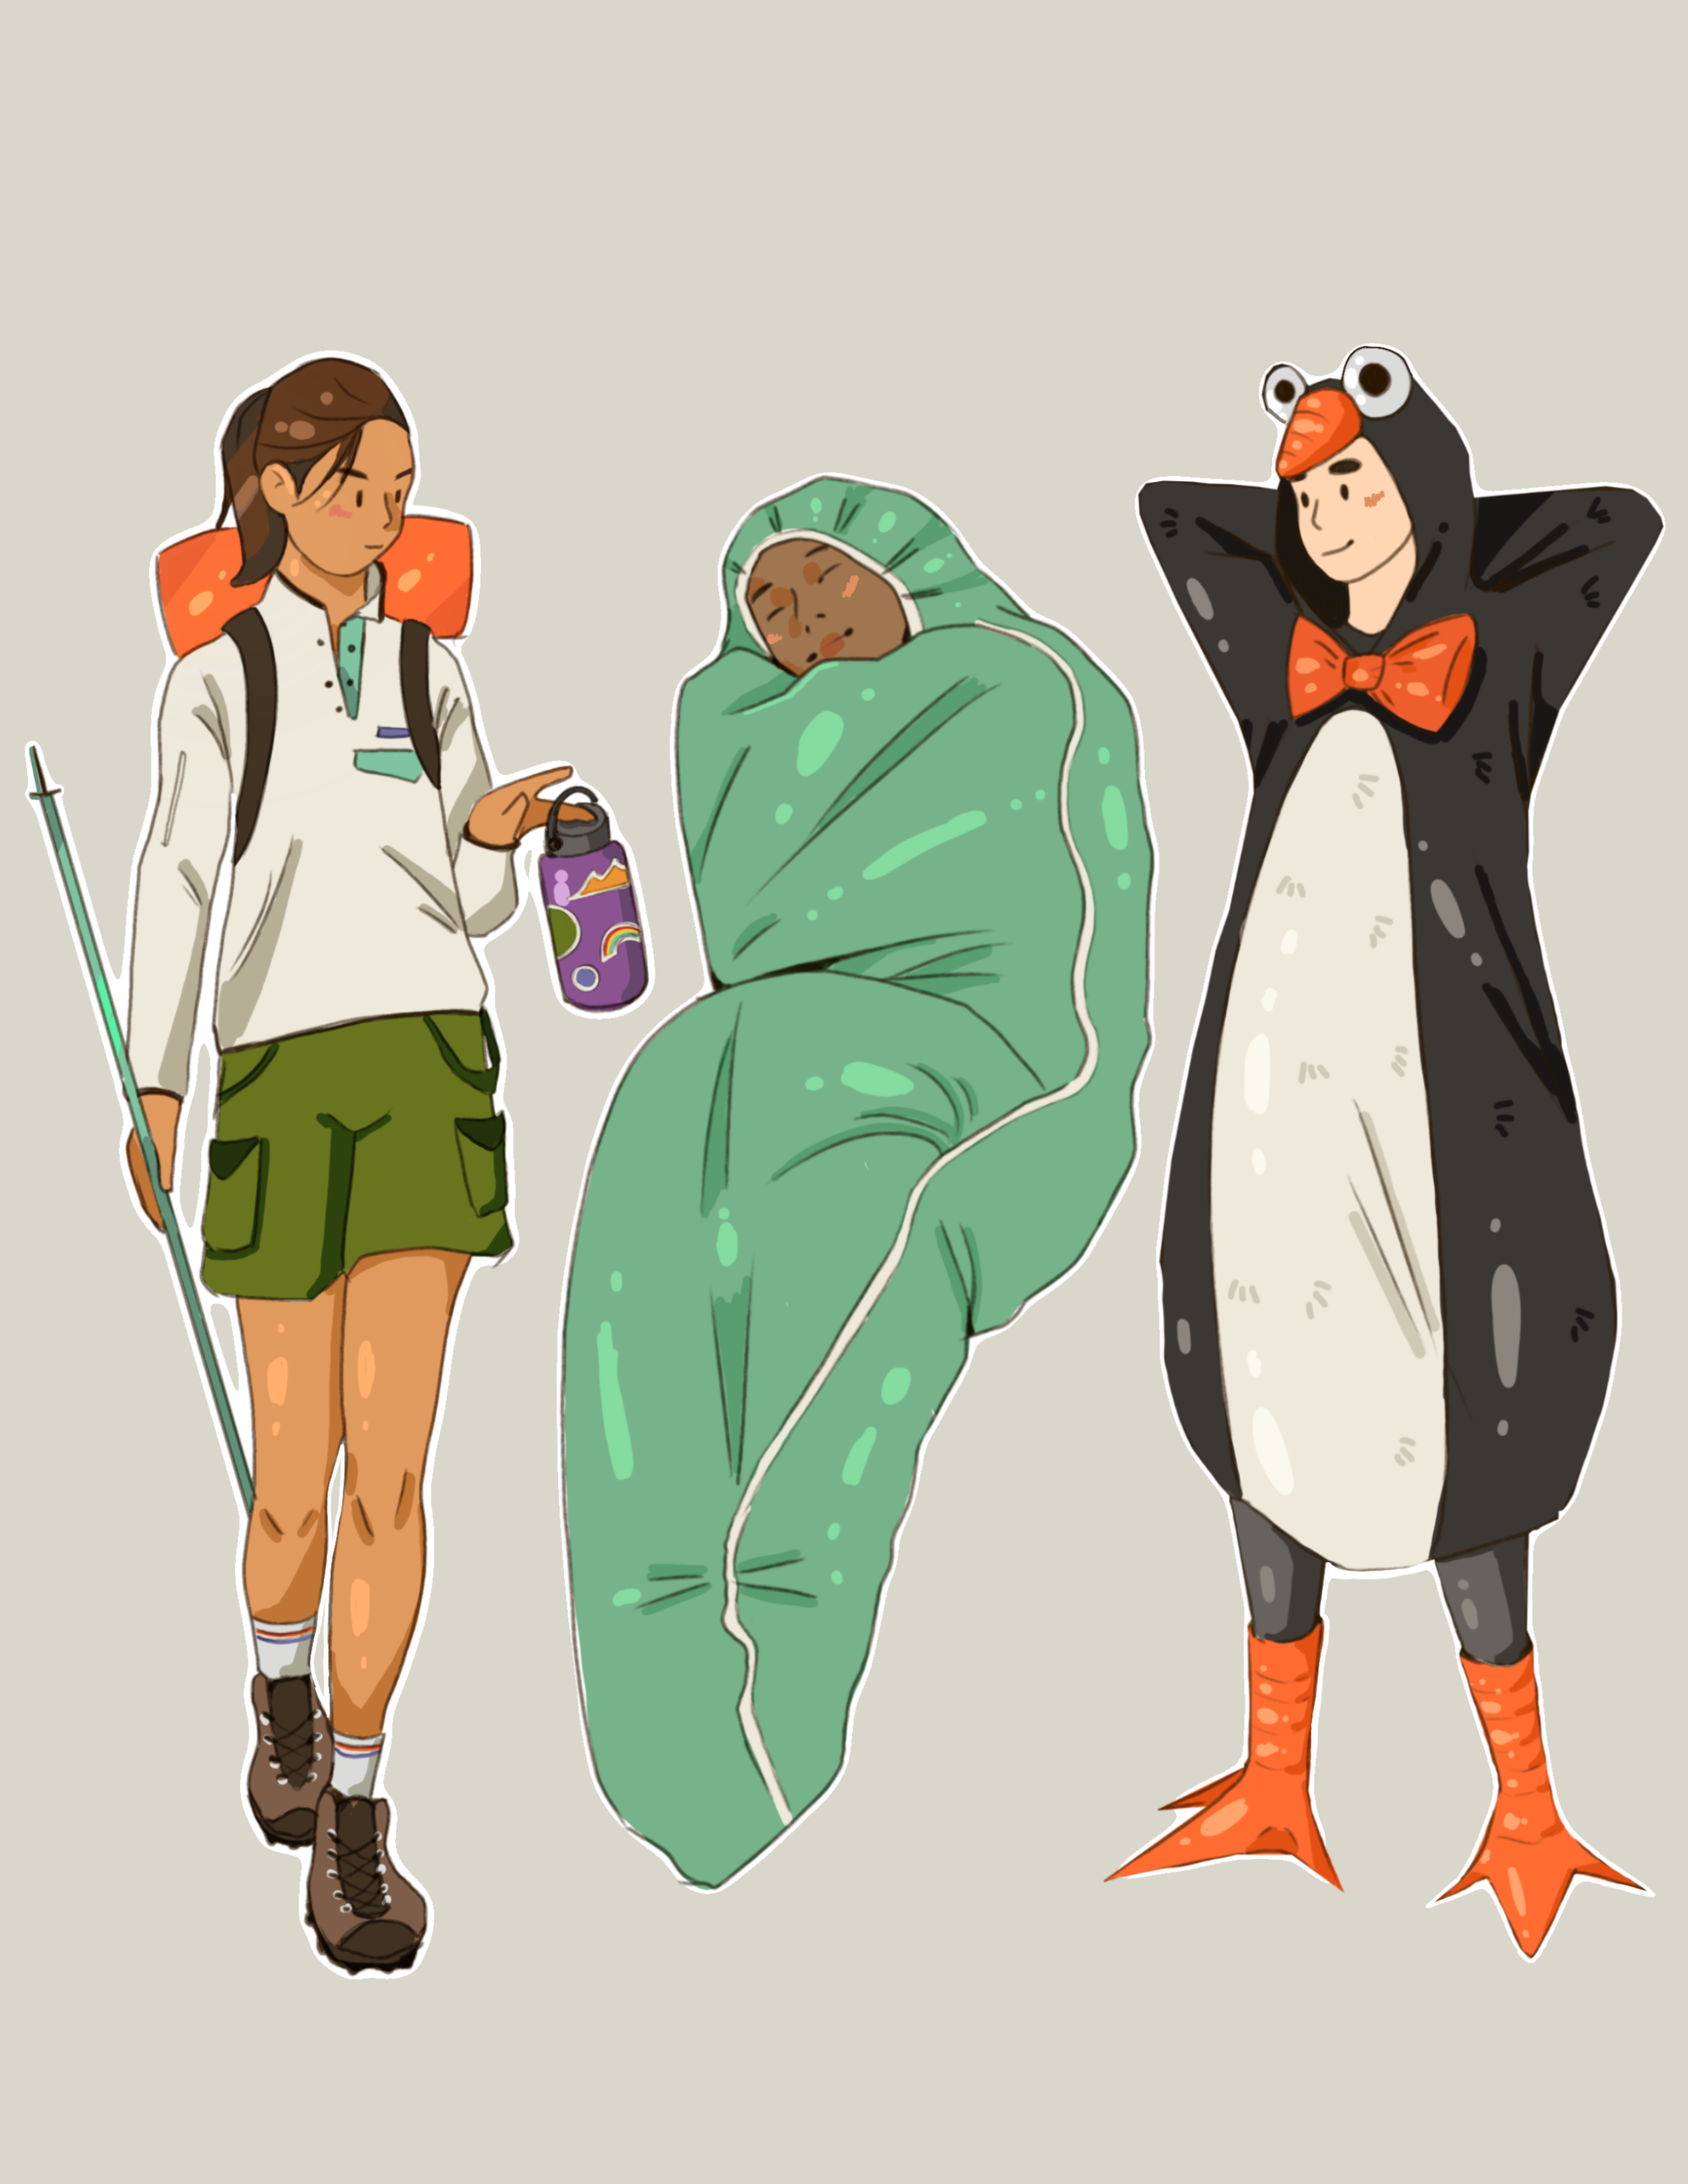 An illustration of a sleeping bag, a hiking outfit, and a penguin suit